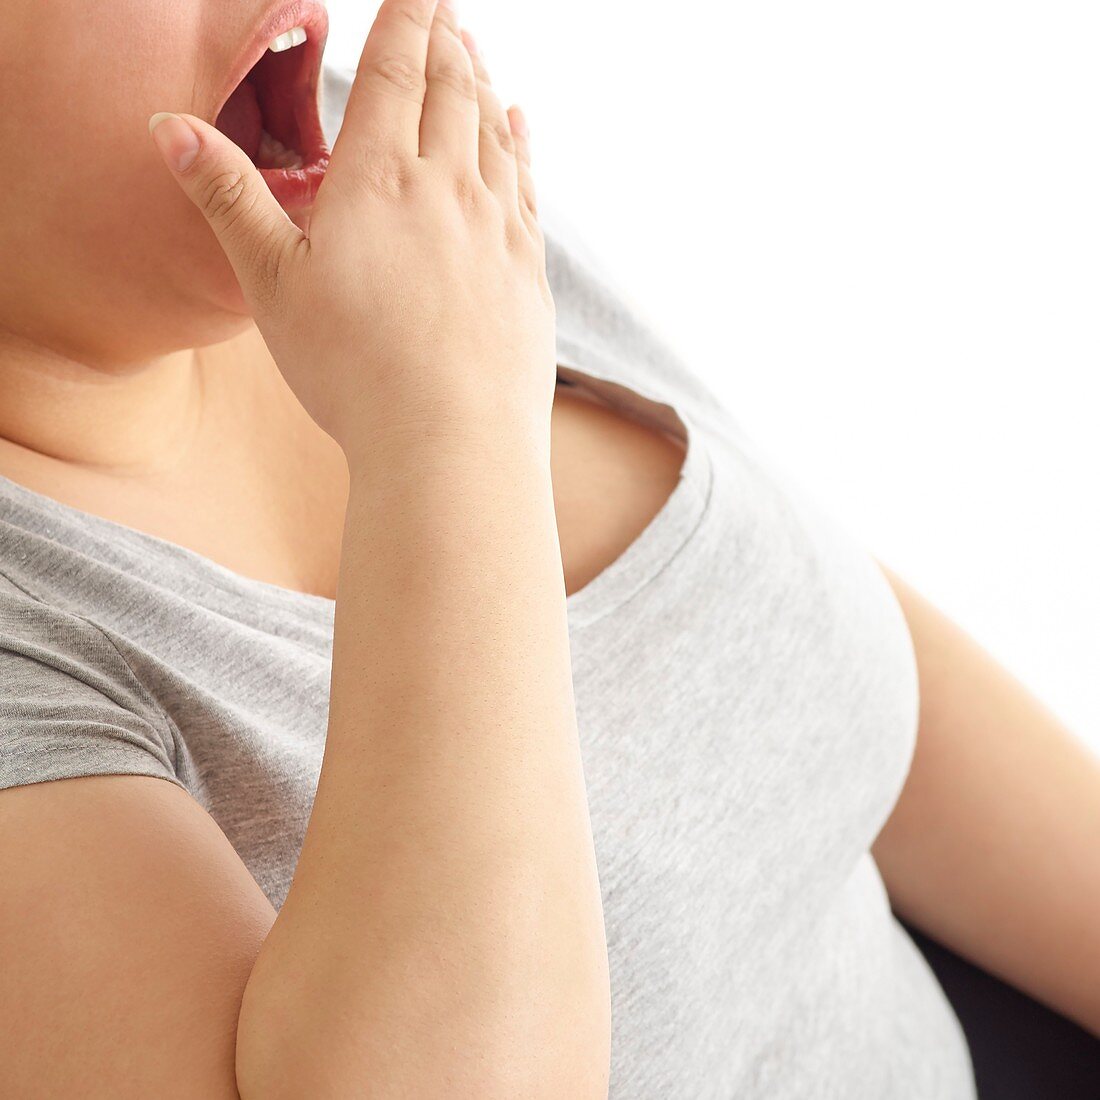 Woman yawning with hand over mouth